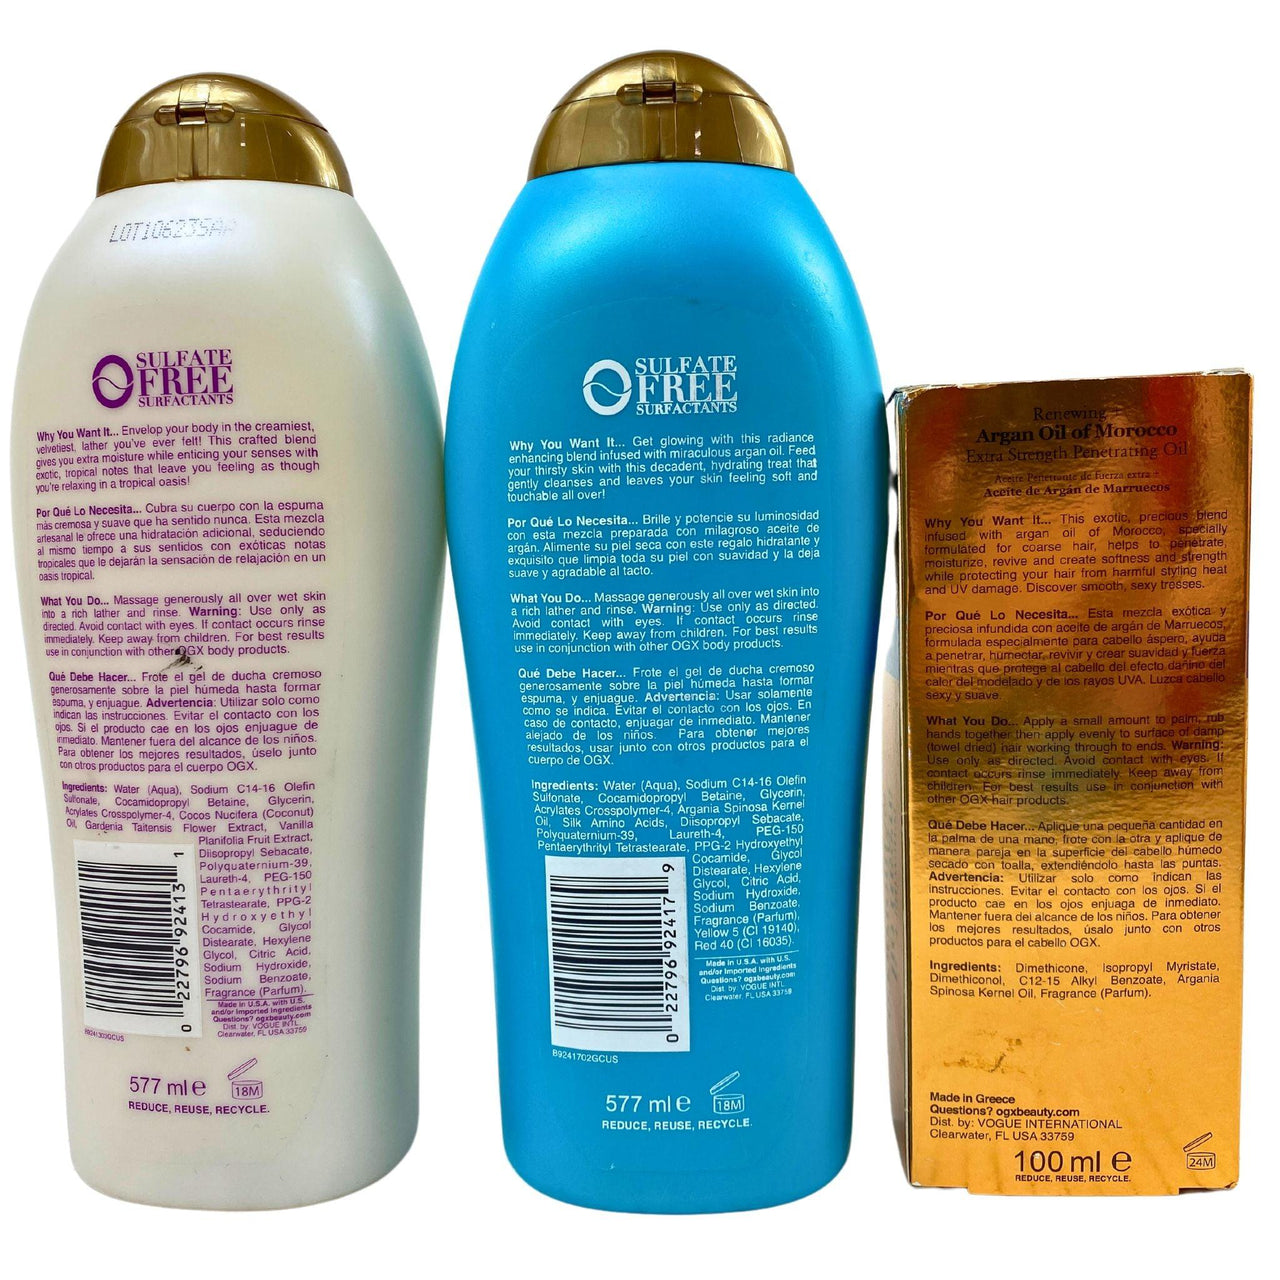 Ogx Mix Includes Assorted Body Wash & Hair Oil (40 Pcs Lot) - Discount Wholesalers Inc